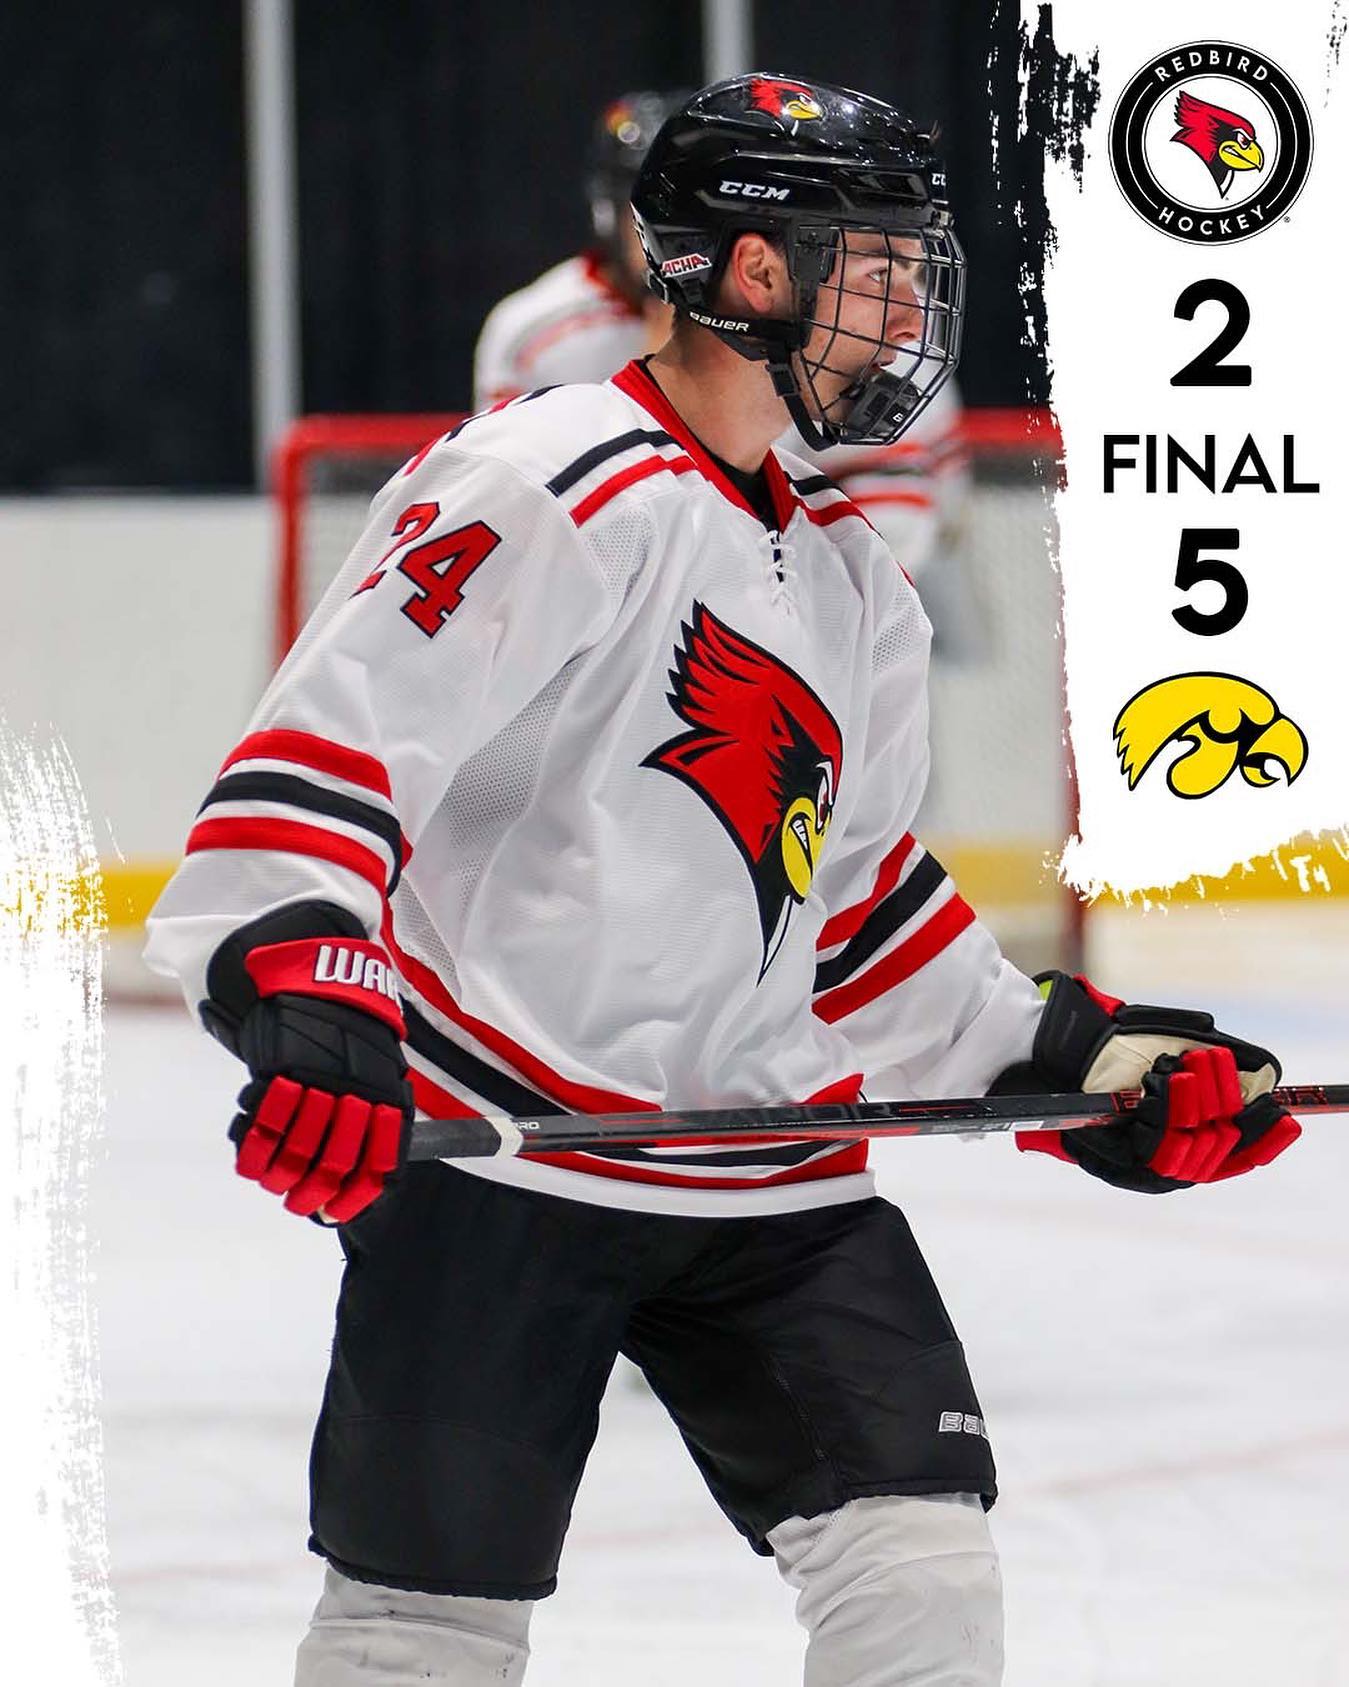 Final. D2 couldn’t get the job done against Iowa tonight. They look for revenge tomorrow. 

#hereforgood #rollbirds